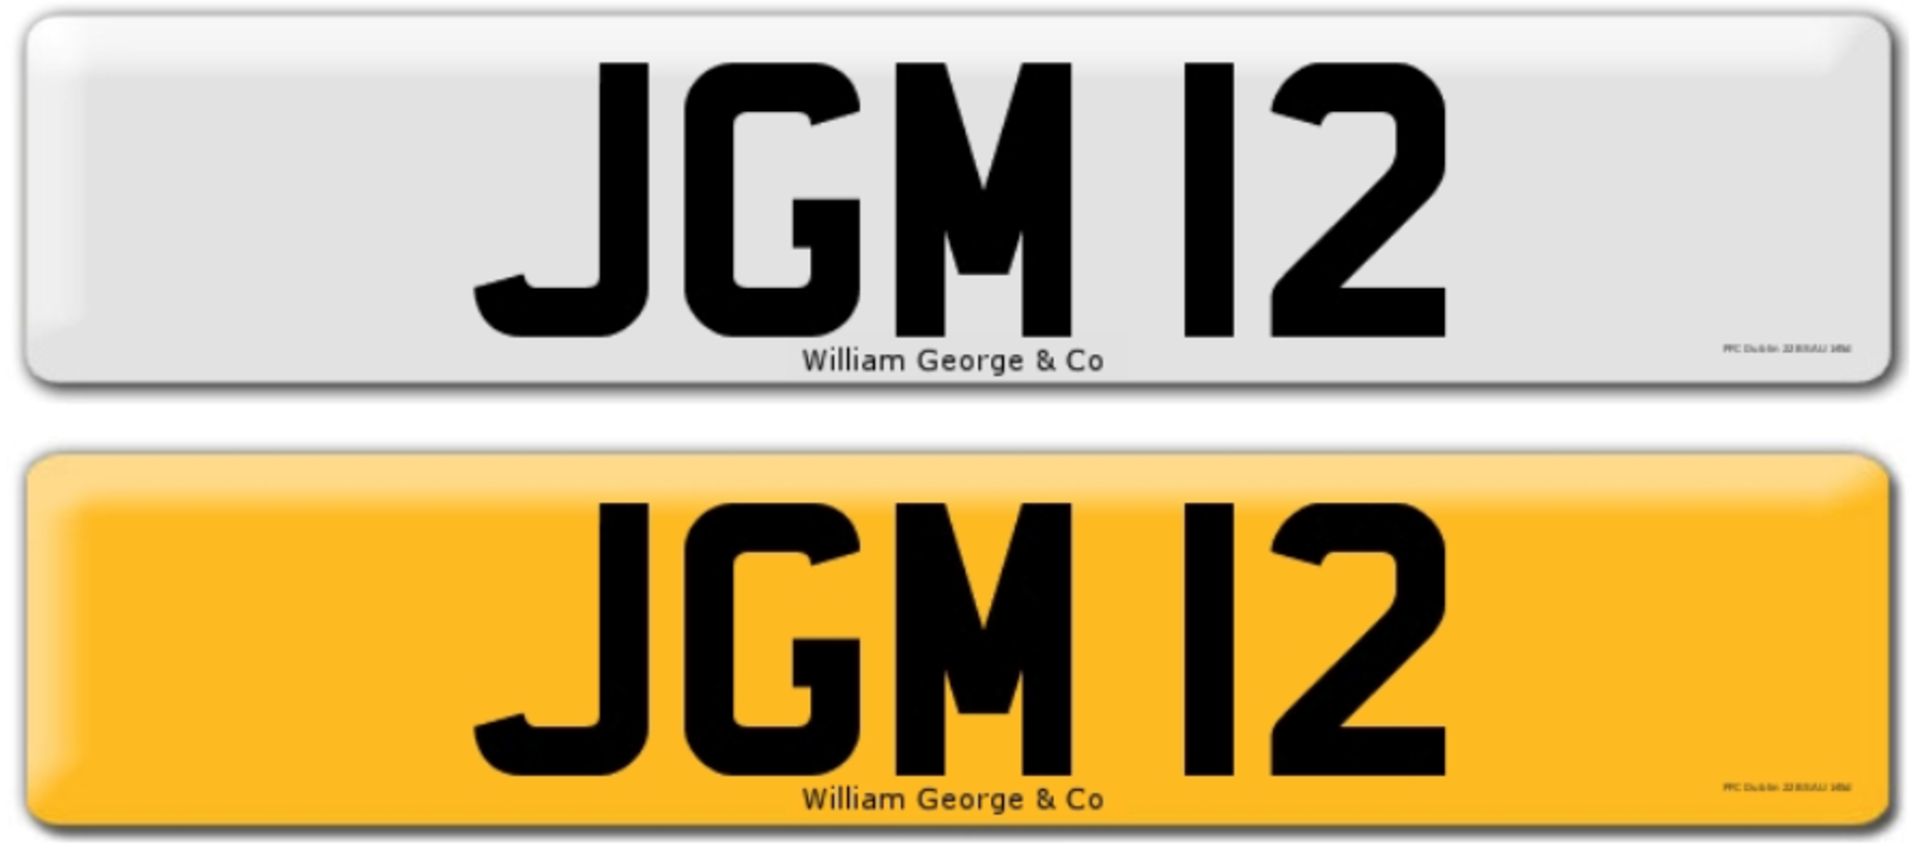 Registration on DVLA retention certificate, ready to transfer JGM 12, This number plate /